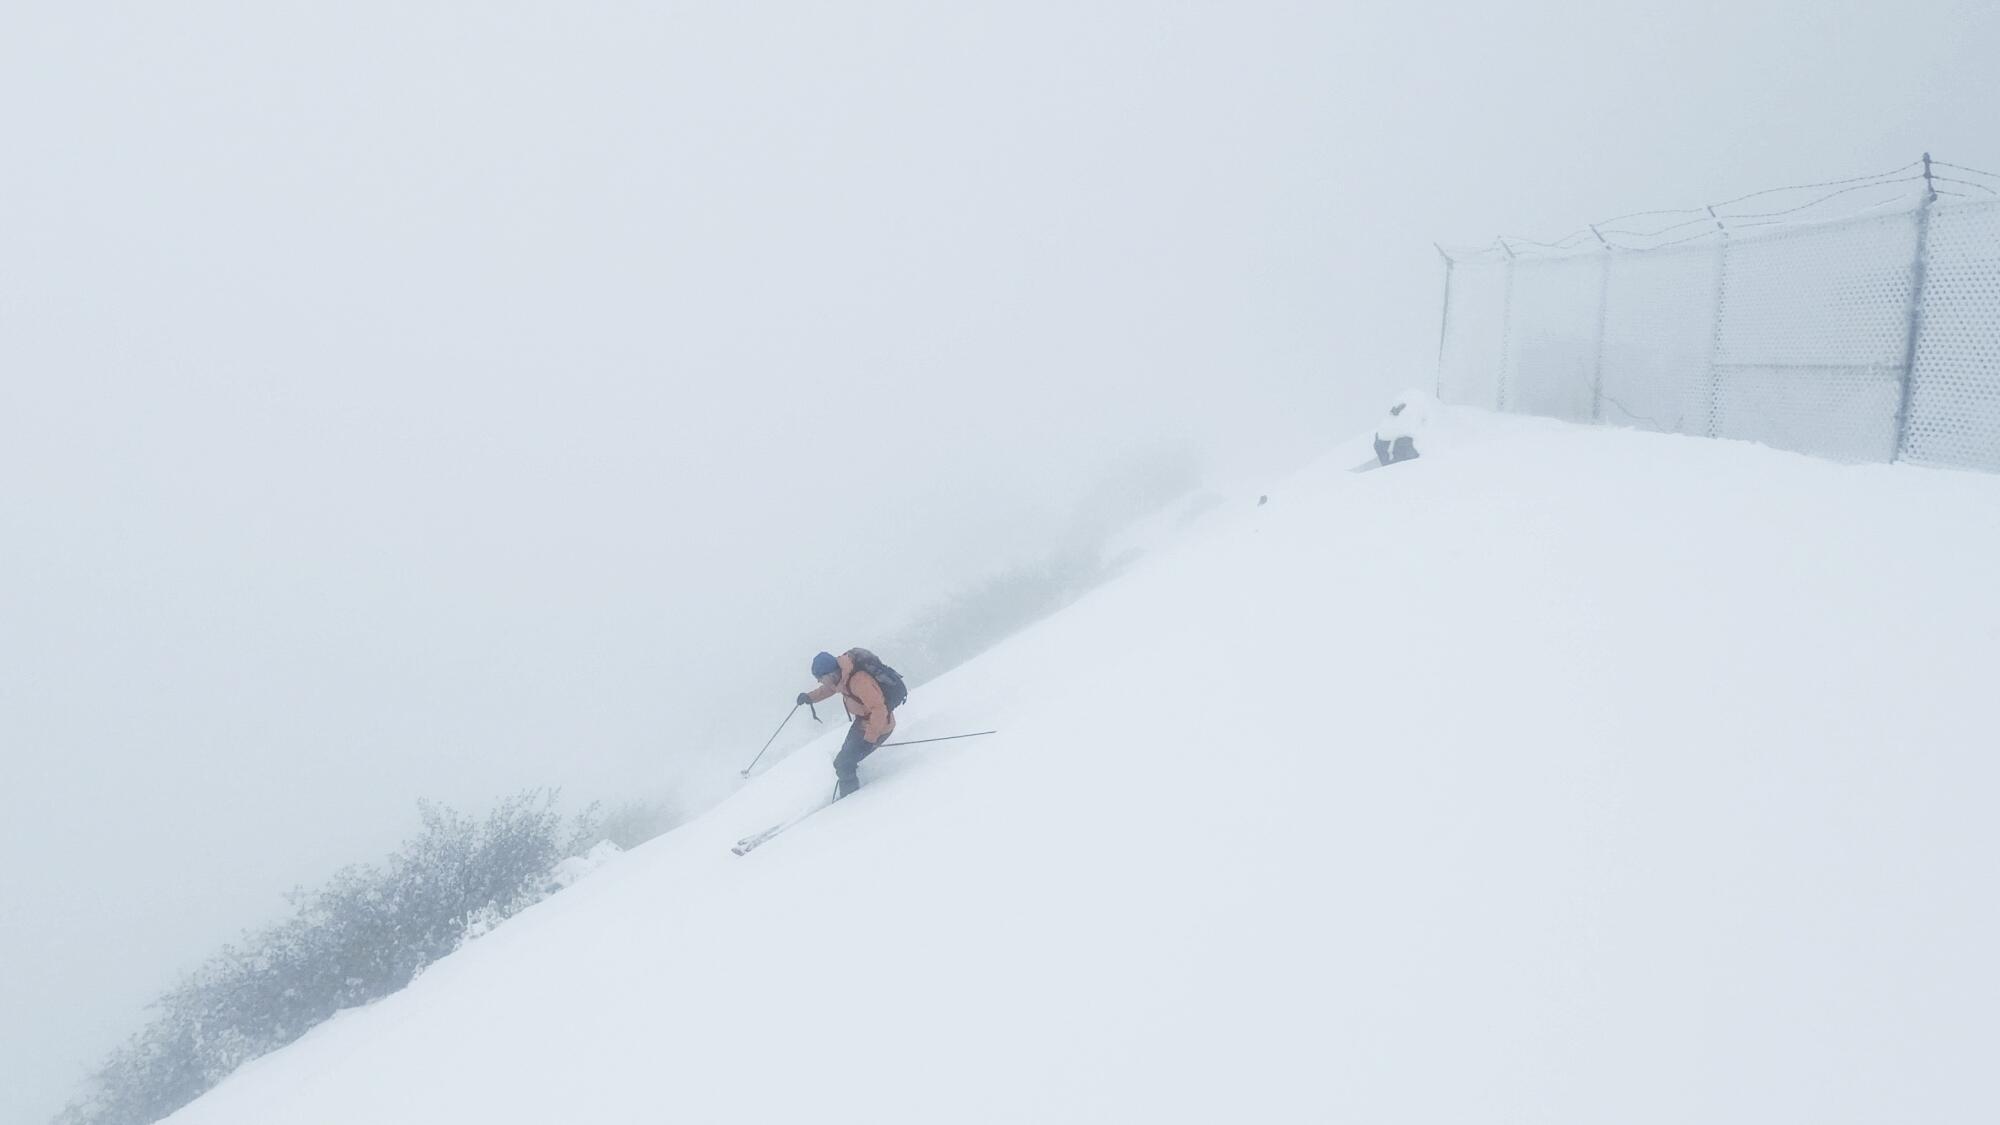 Preston Lear begins his descent from the fog-shrouded summit of Mt. Lukens.